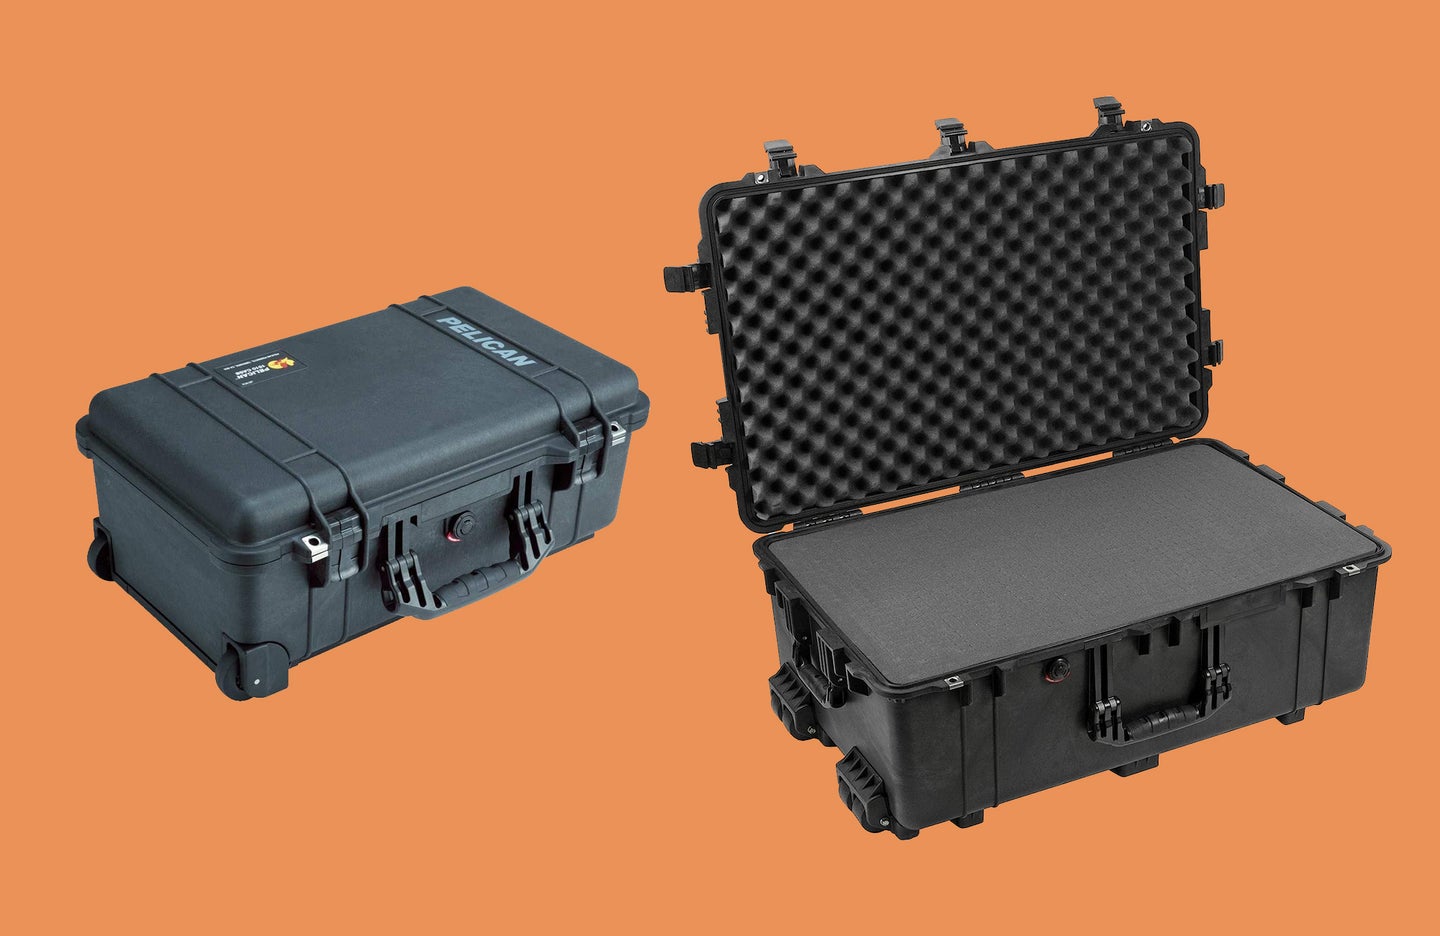 Two Pelican cases against an orange background